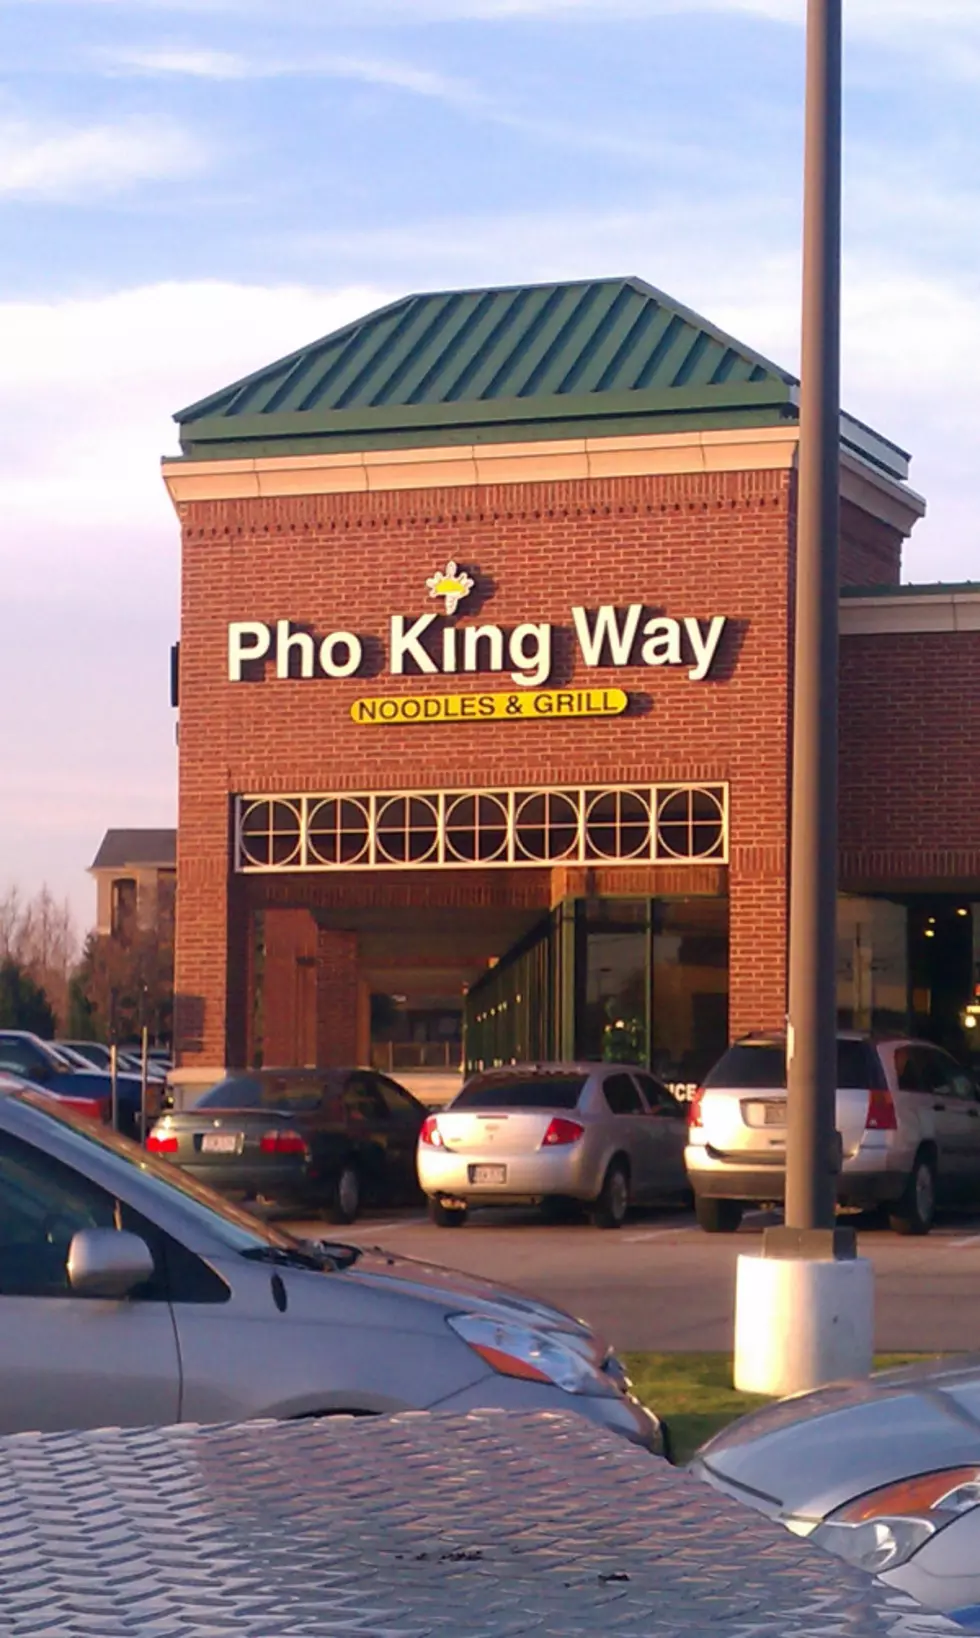 No Pho King Way This Won Worst Business Name (And Maybe We Need Some Commas) [PHOTO]